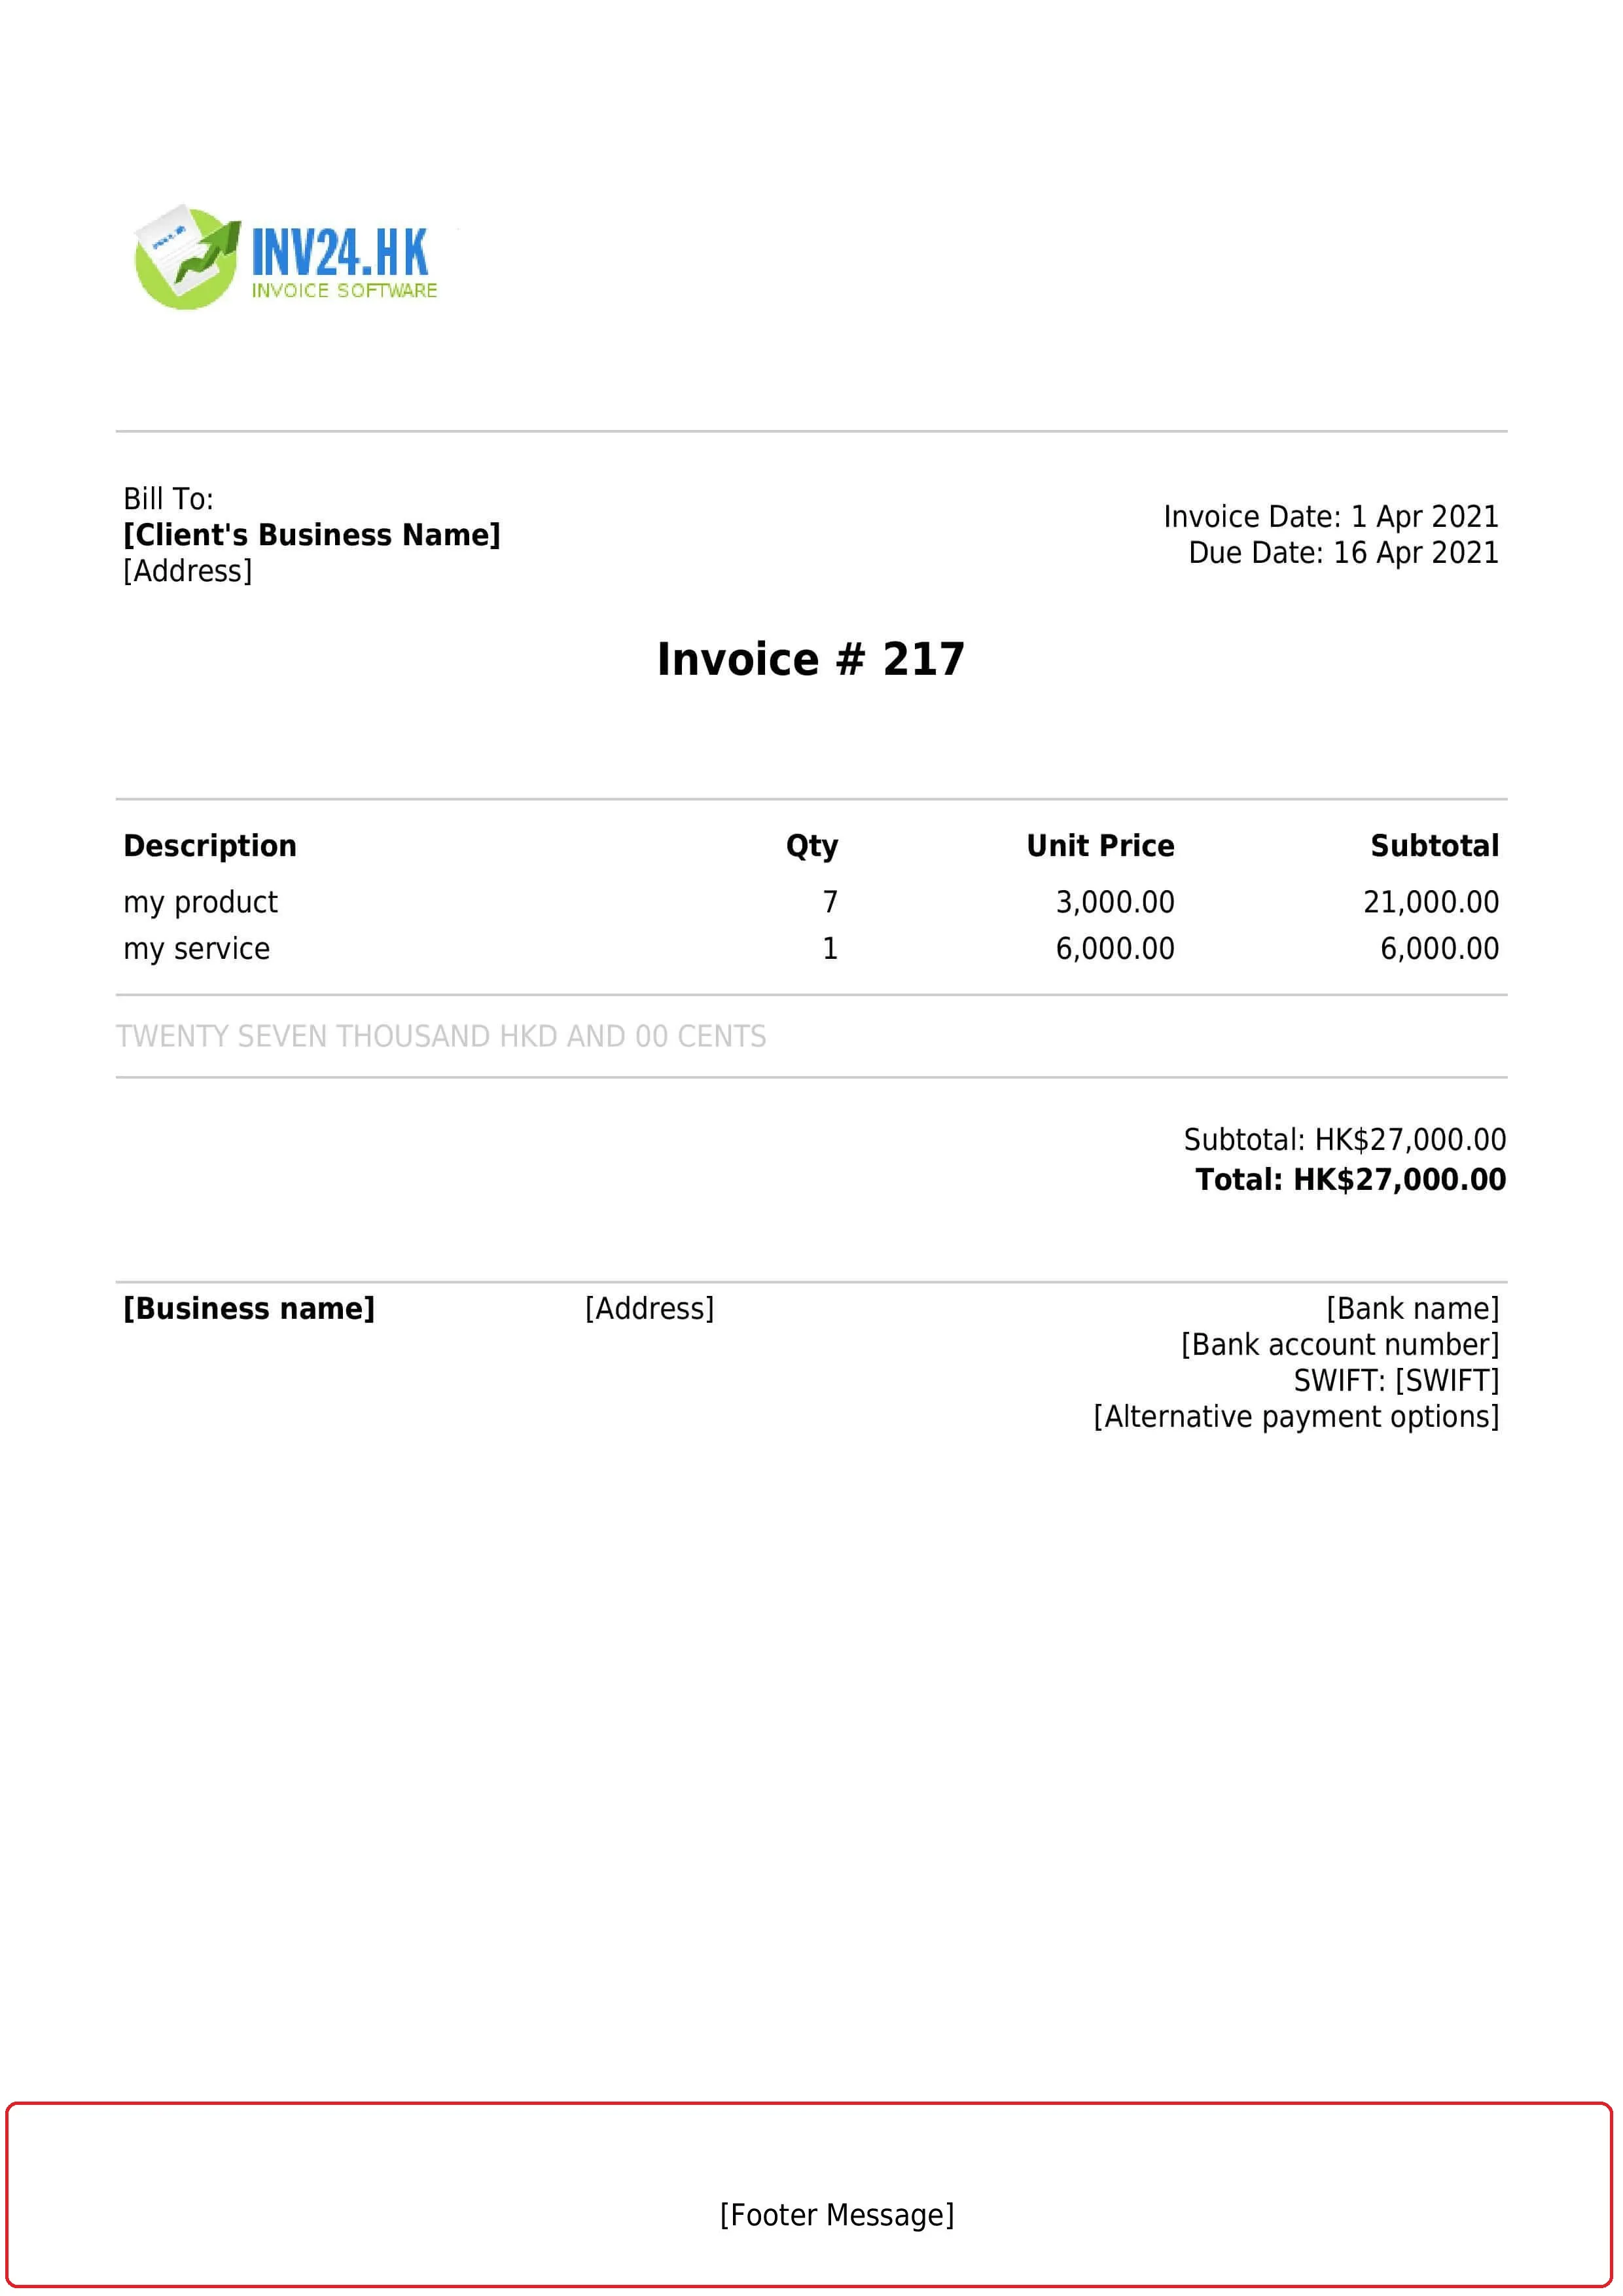 Invoice footer message